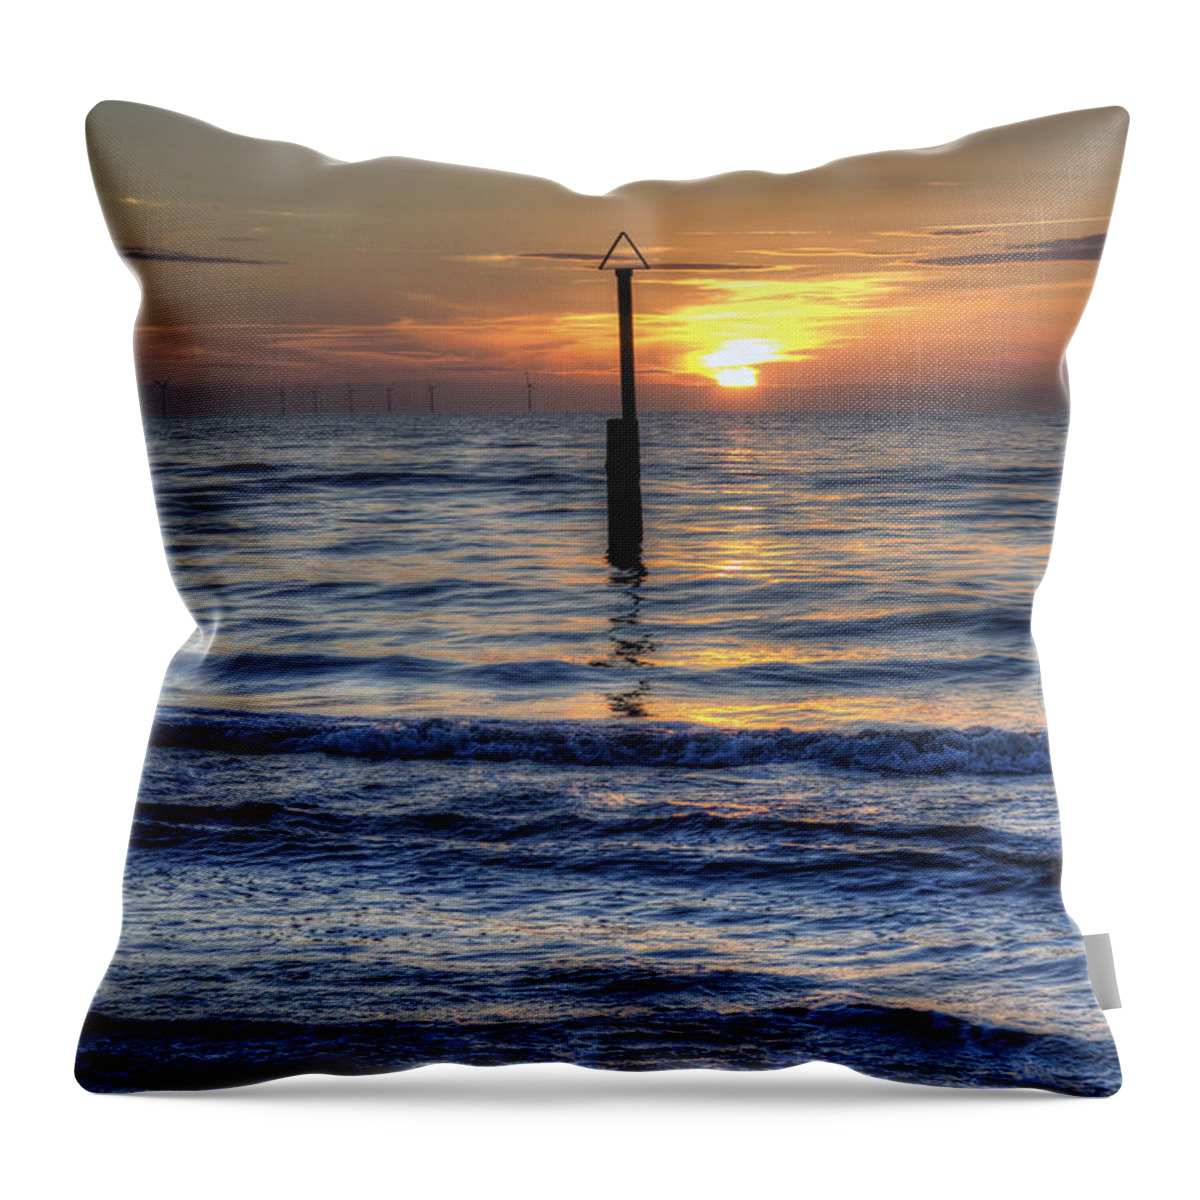 Sunset Throw Pillow featuring the photograph Ocean Sunset by Ian Mitchell